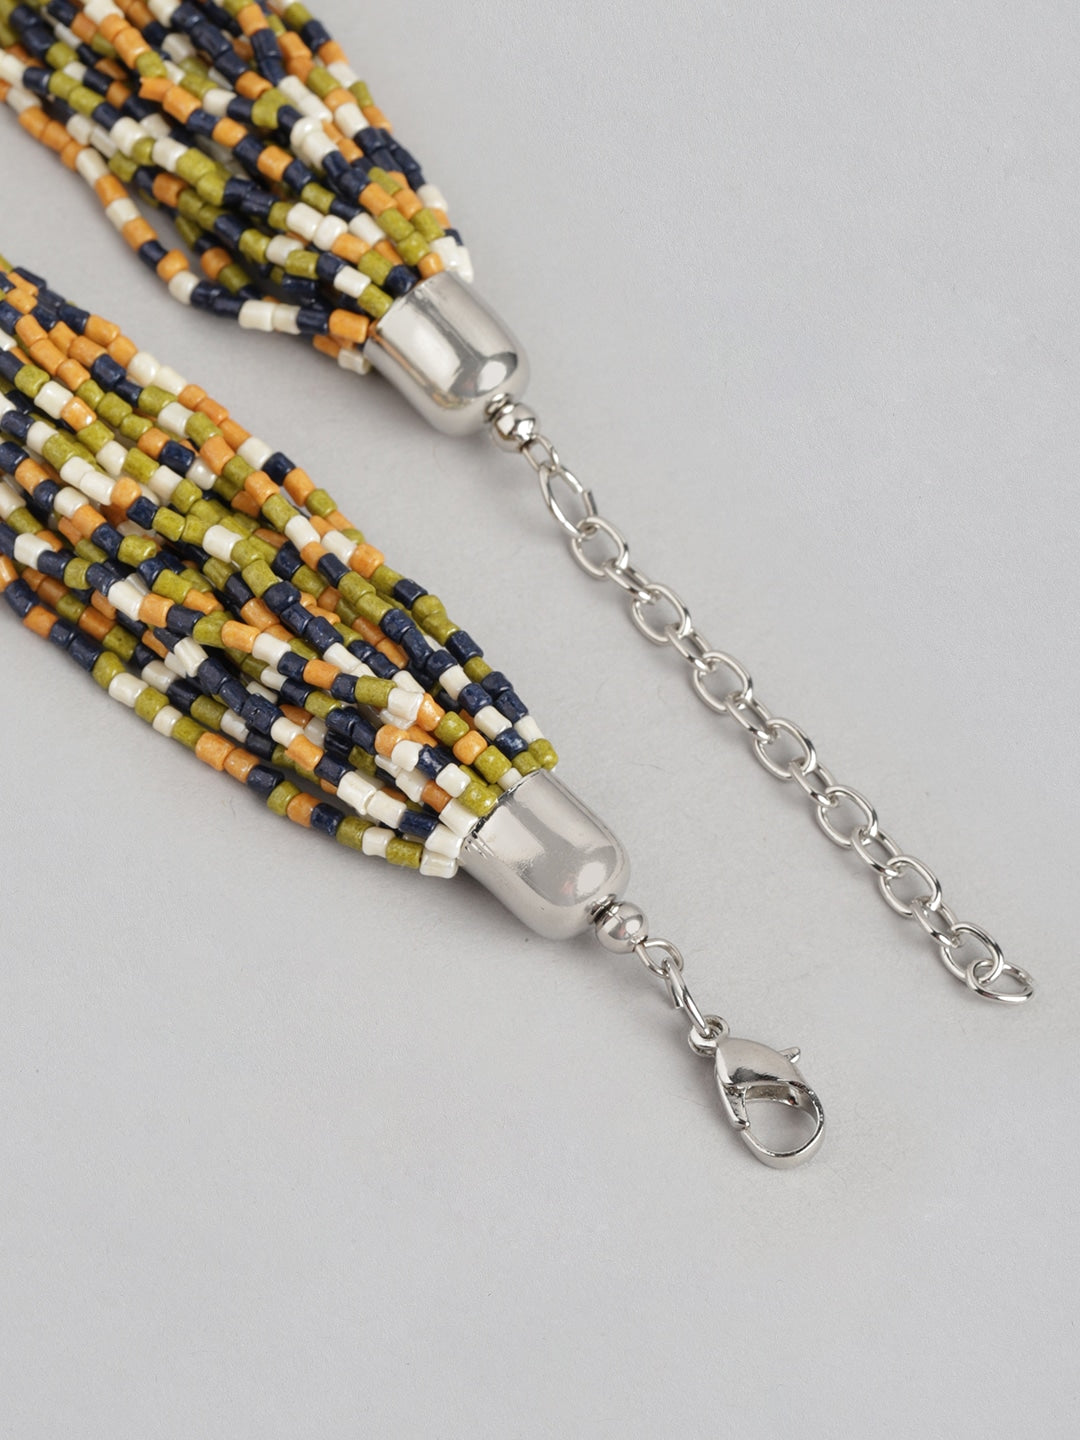 Beaded Multi-Layered Statement Necklace